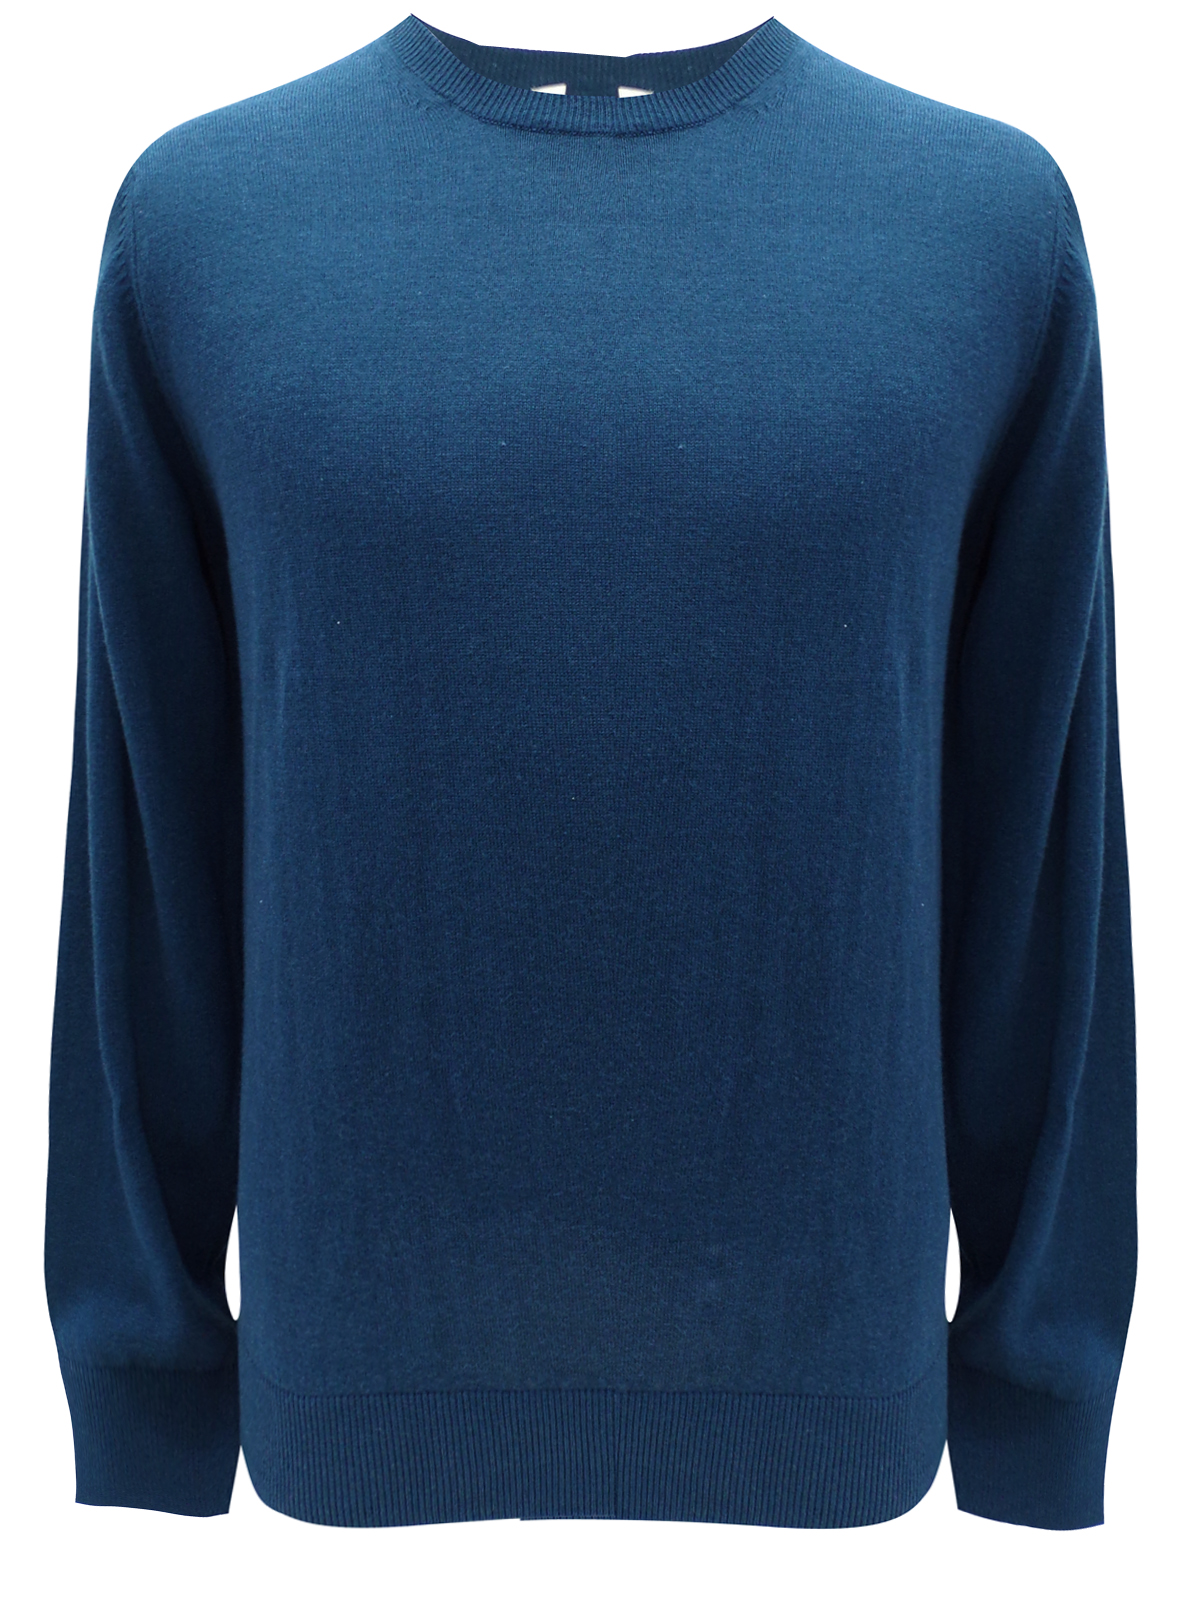 Marks and Spencer - - M&5 PETROL Cotton Blend Long Sleeve Jumper - Size ...